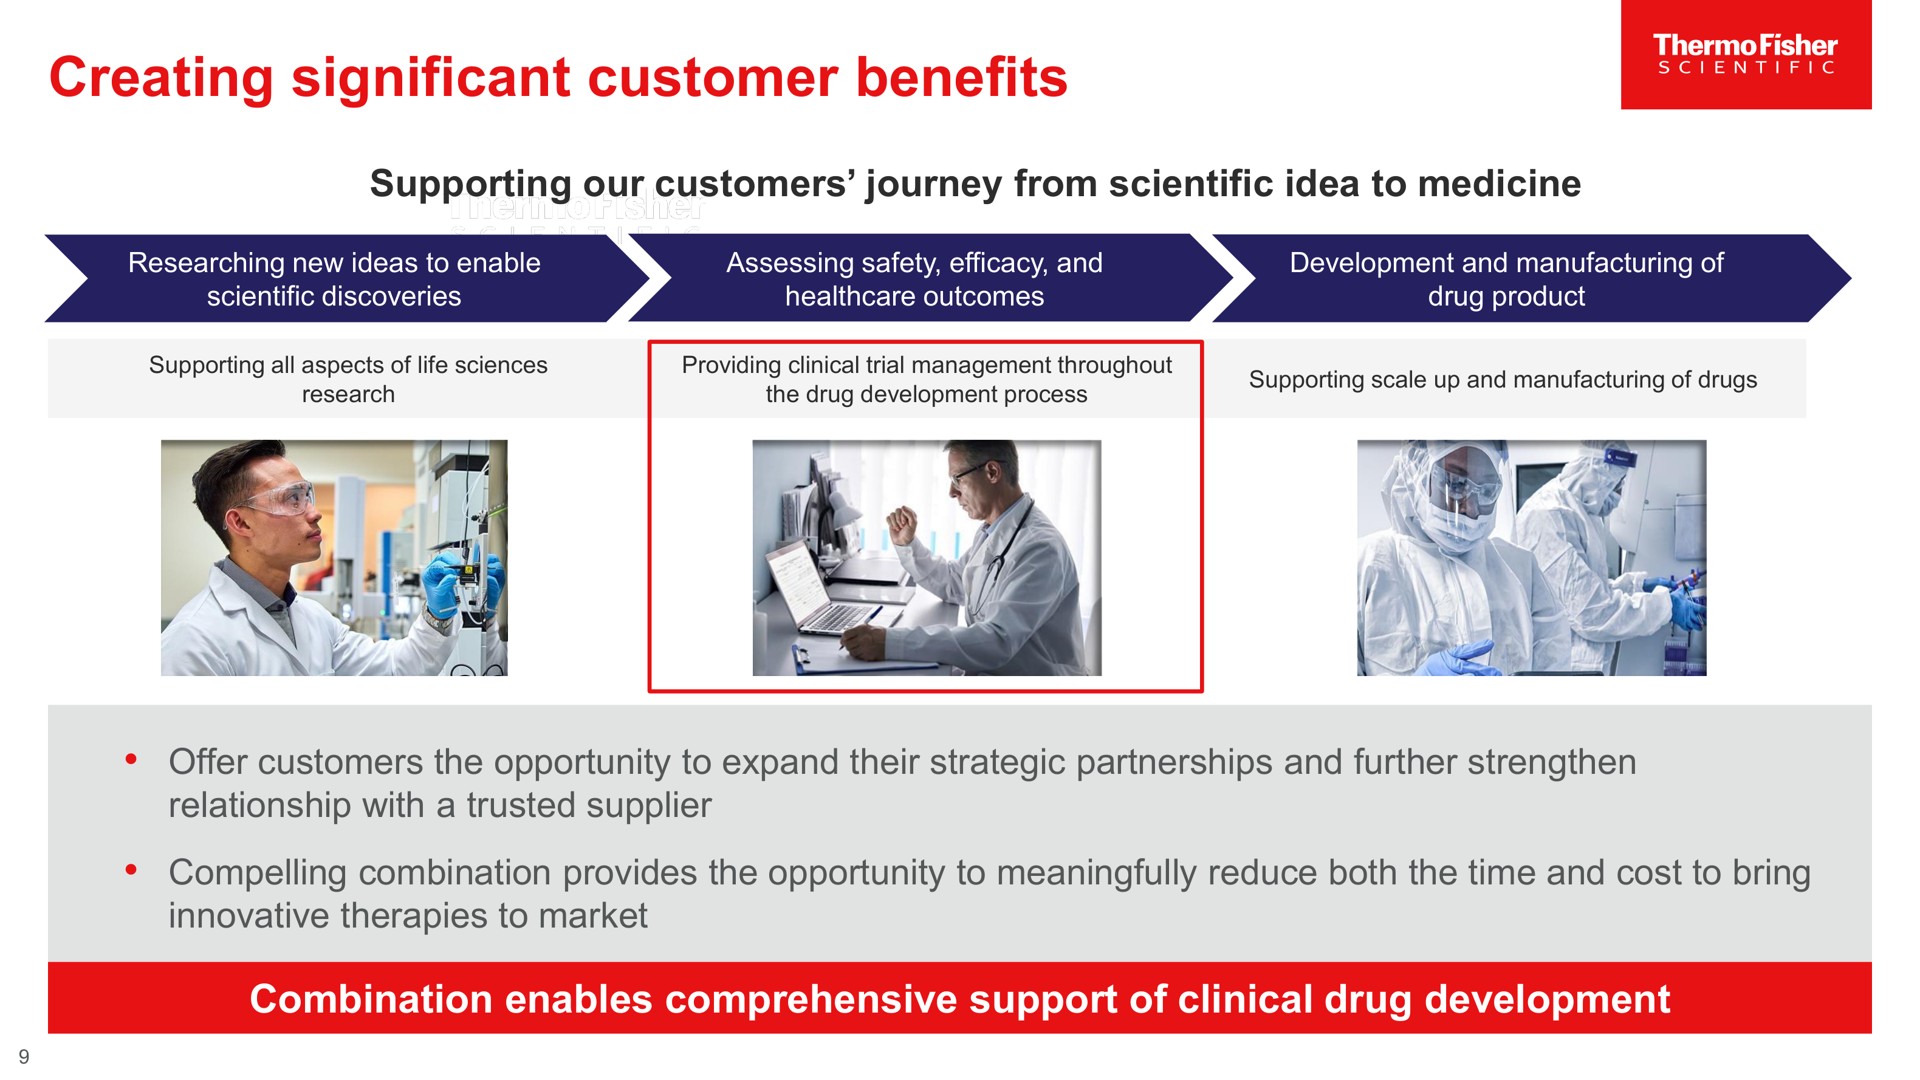 creating significant customer benefits | Thermo Fisher